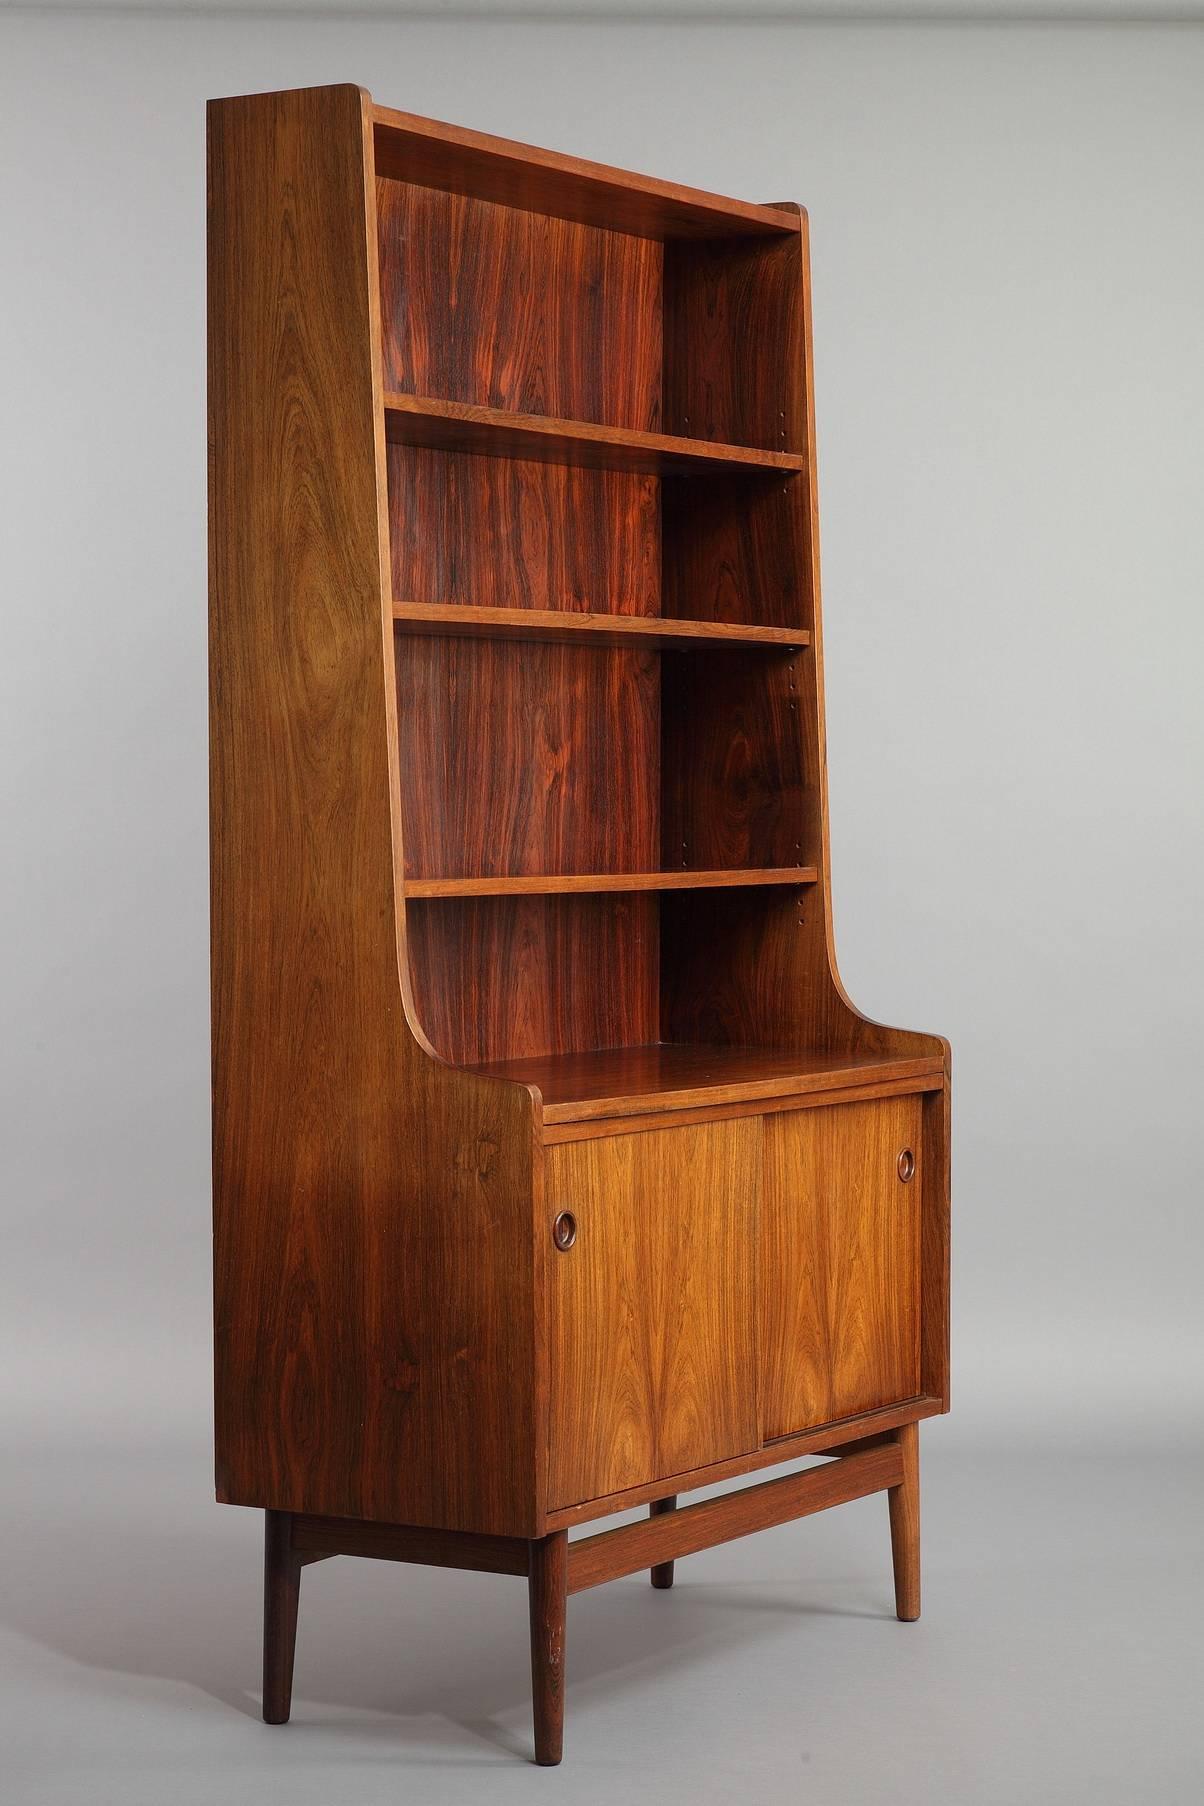 A rosewood bookcase by Johannes Sorth with three adjustable upper shelves and a container with sliding doors. Manufactured by Bornholms Mobelfabrik. Good vintage condition,

circa 1960
Dimension: W 39.4 in x D 16.9in x H 71.7in.
Dimension: L